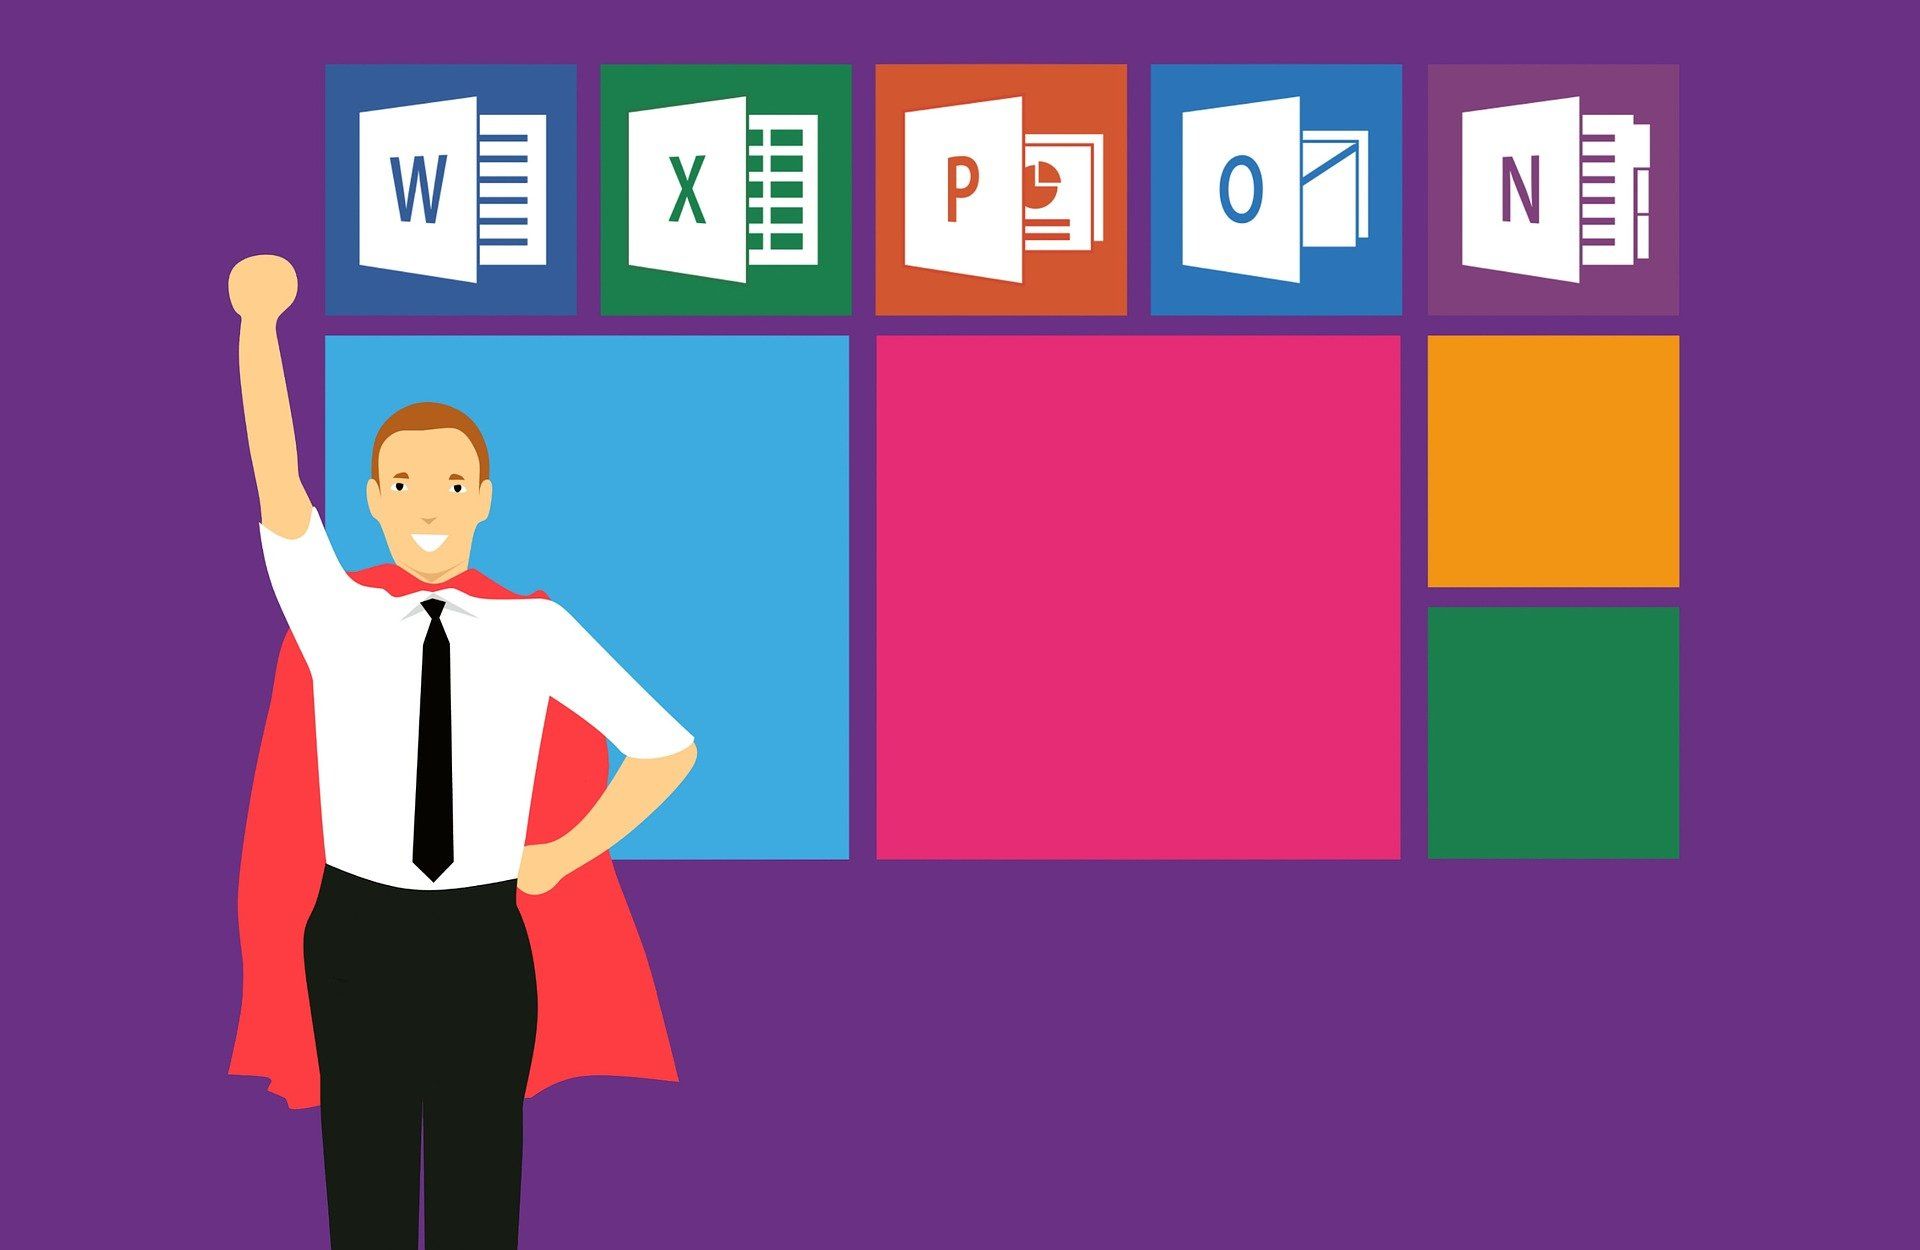 the various Microsoft software options like Word, Excel, Powerpoint